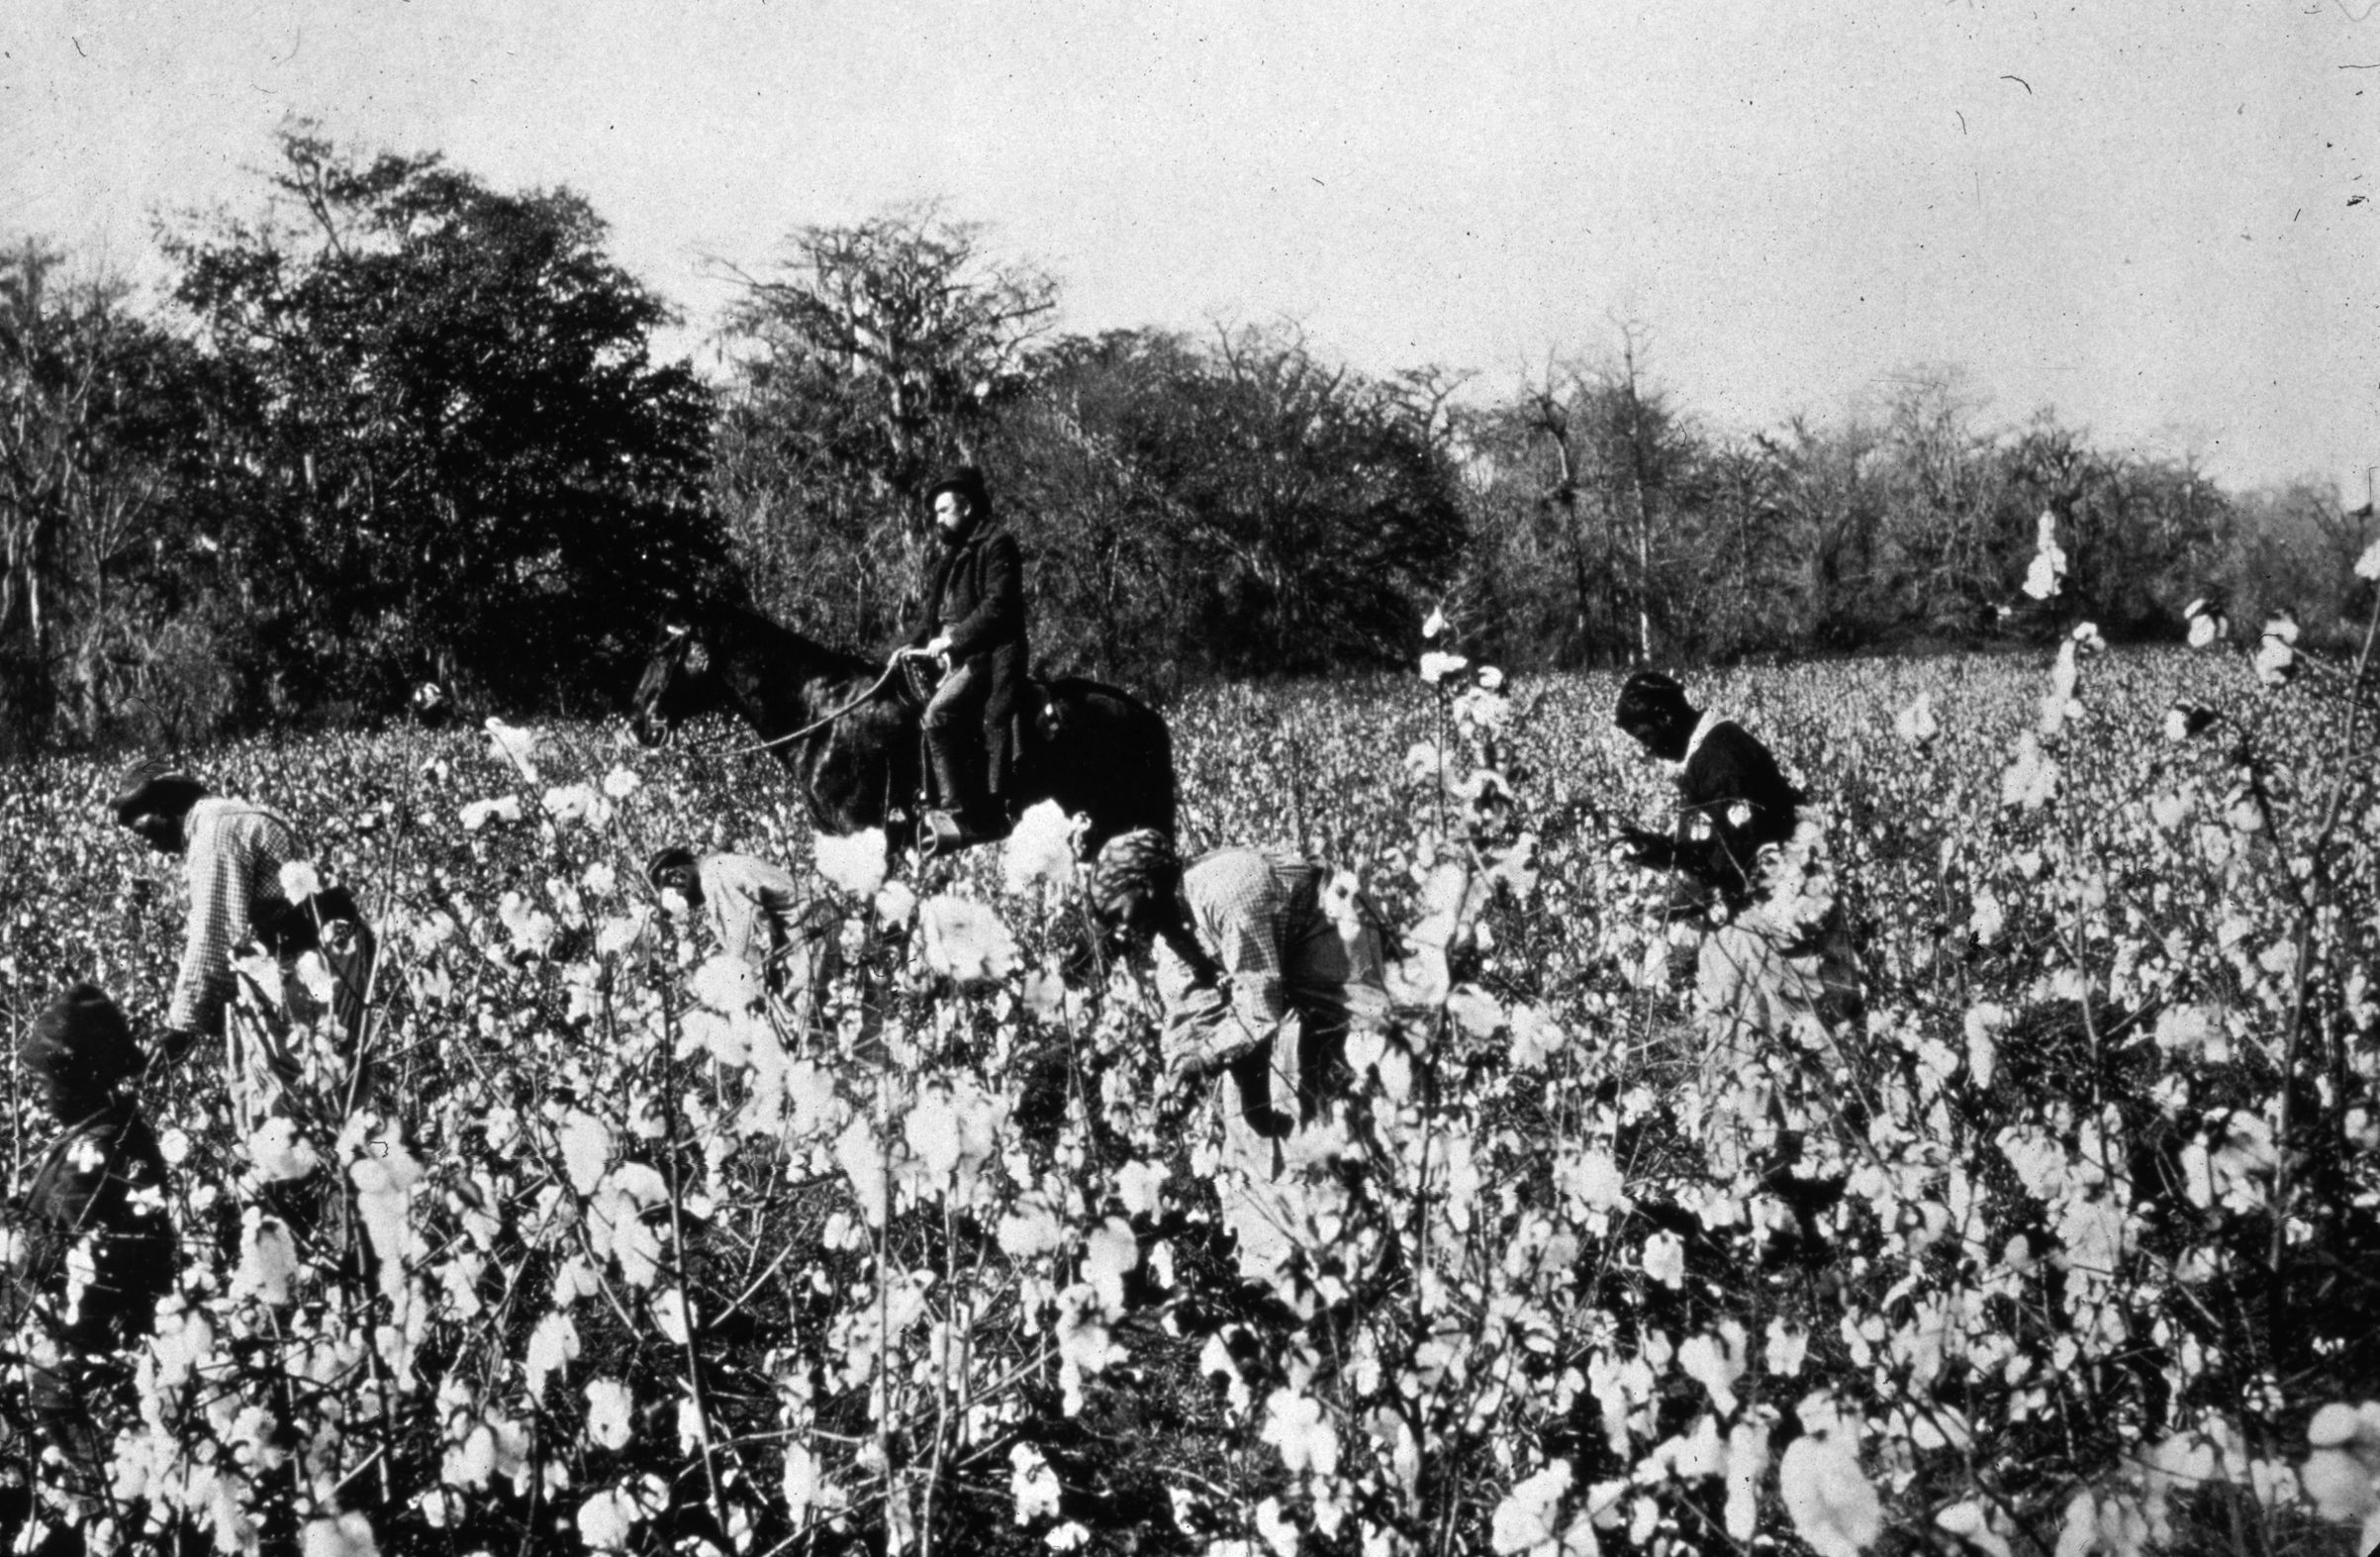 circa 1850: An overseer riding past people picking cotton in a field in the southern states of America. (MPI/Getty Images)